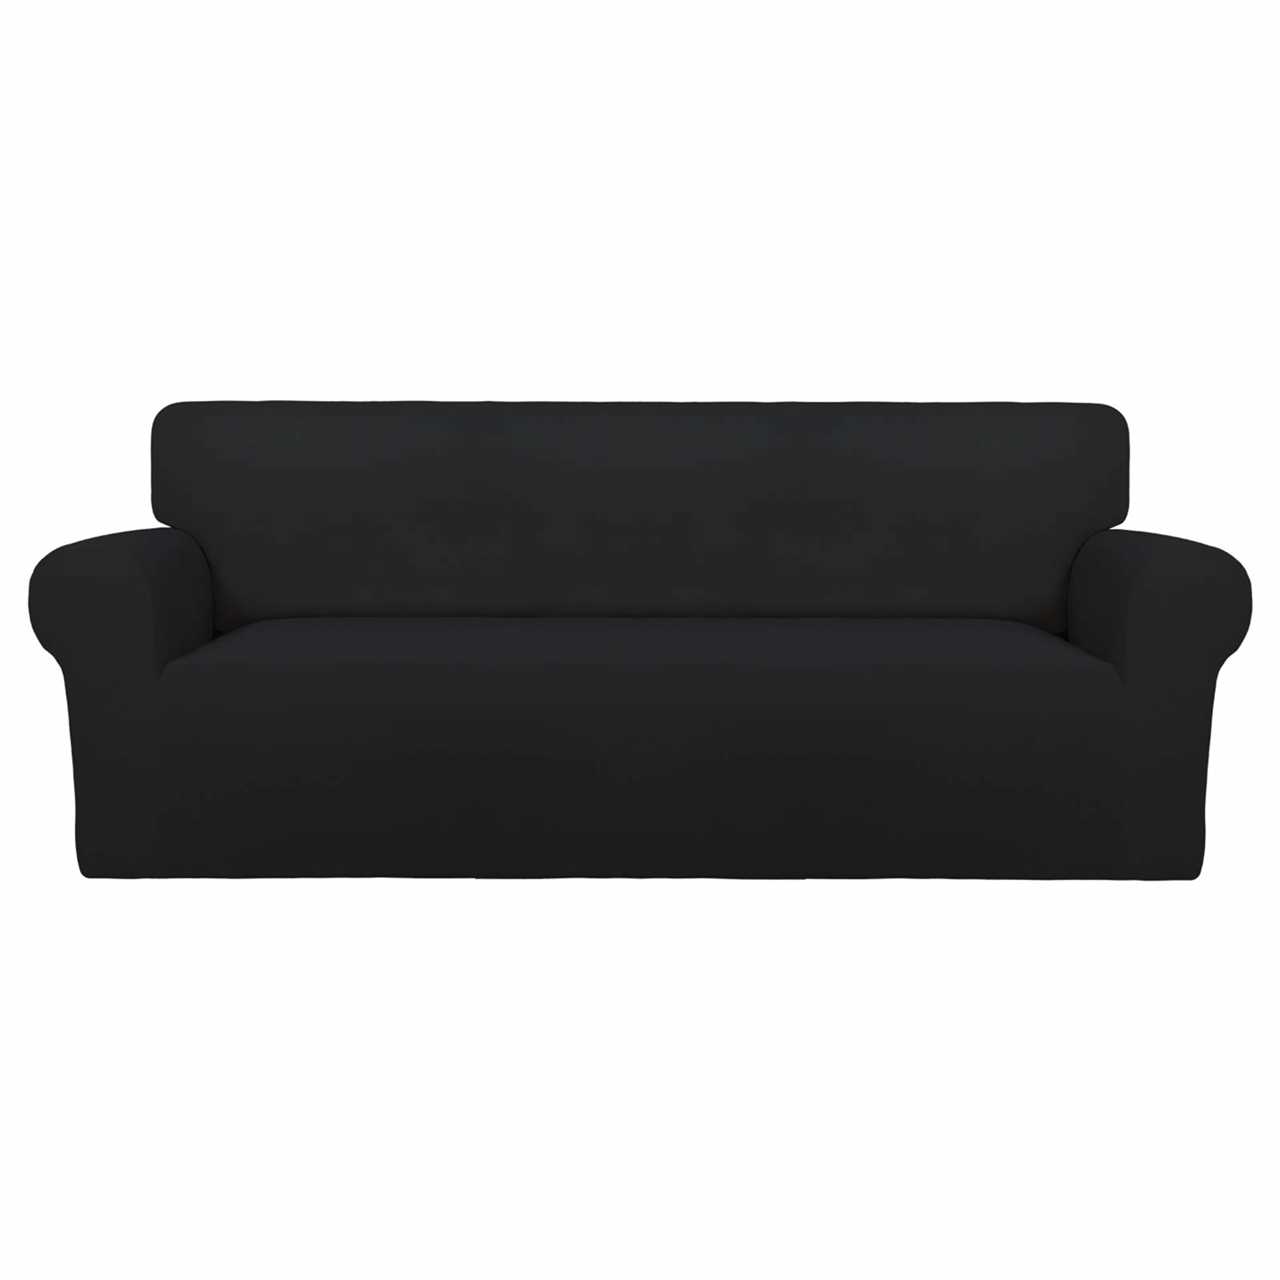 Stretch Couch Covers Protect and Transform Your Sofa | Website Name